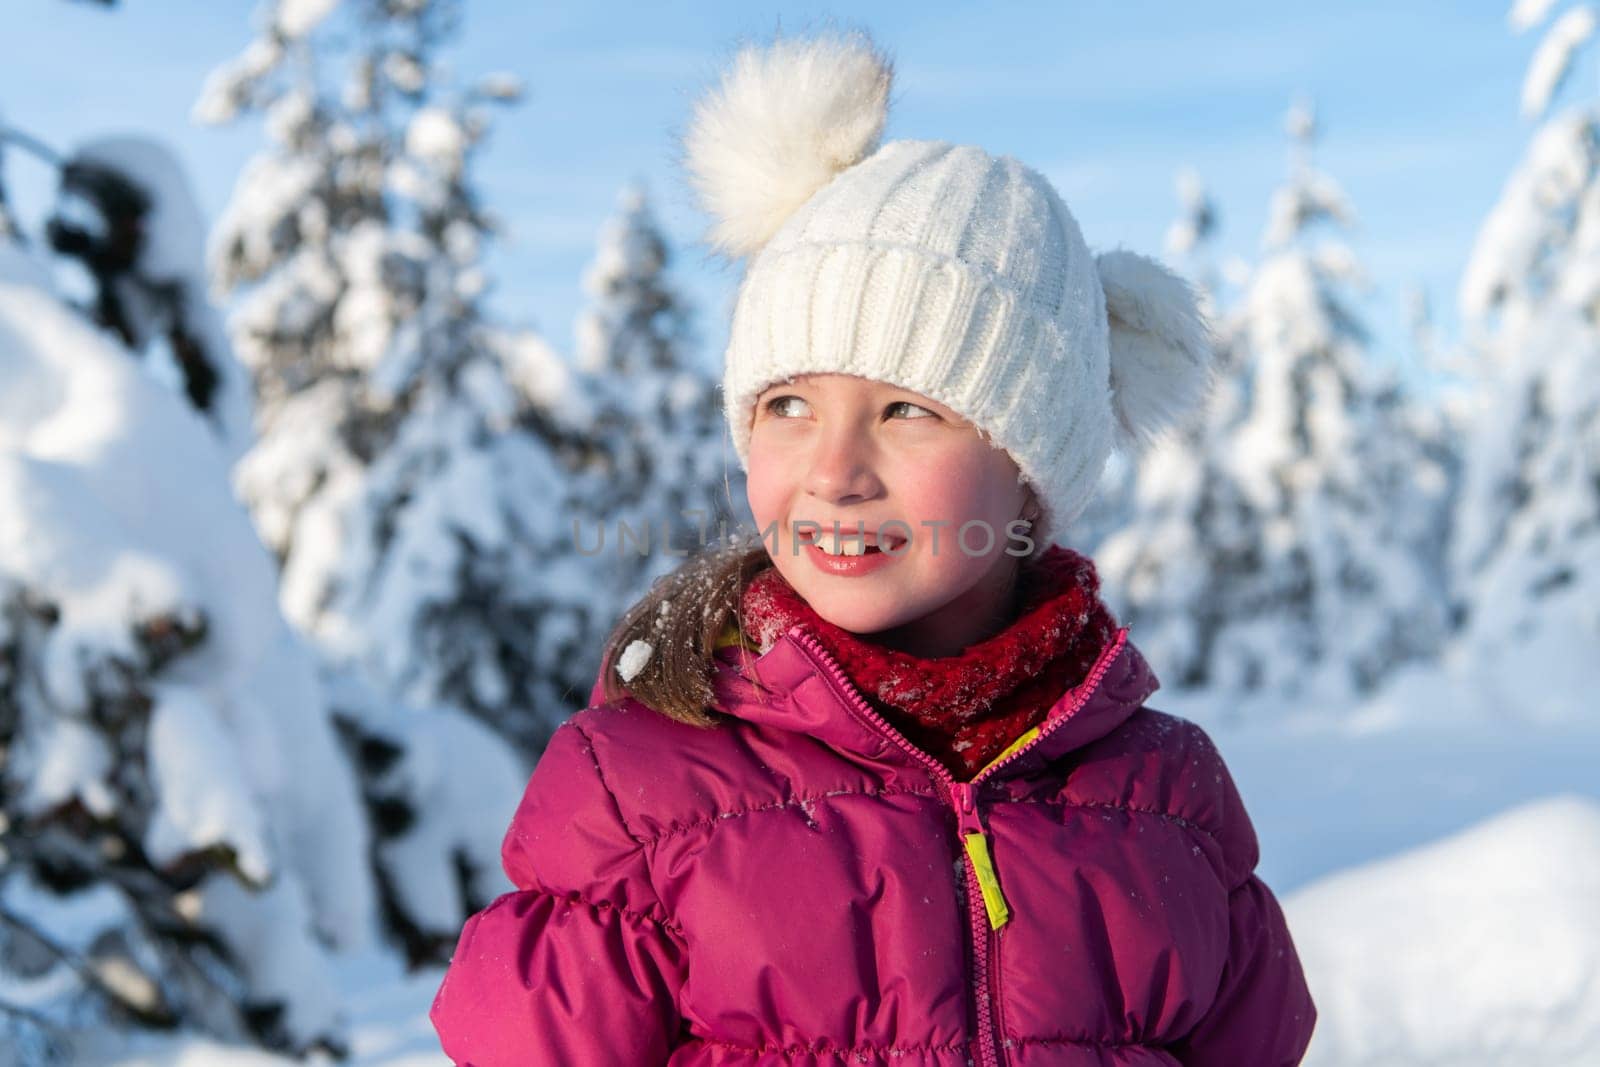 A radiant girl smiles against a backdrop of snow-capped mountains, the sun illuminating her joyful expression.